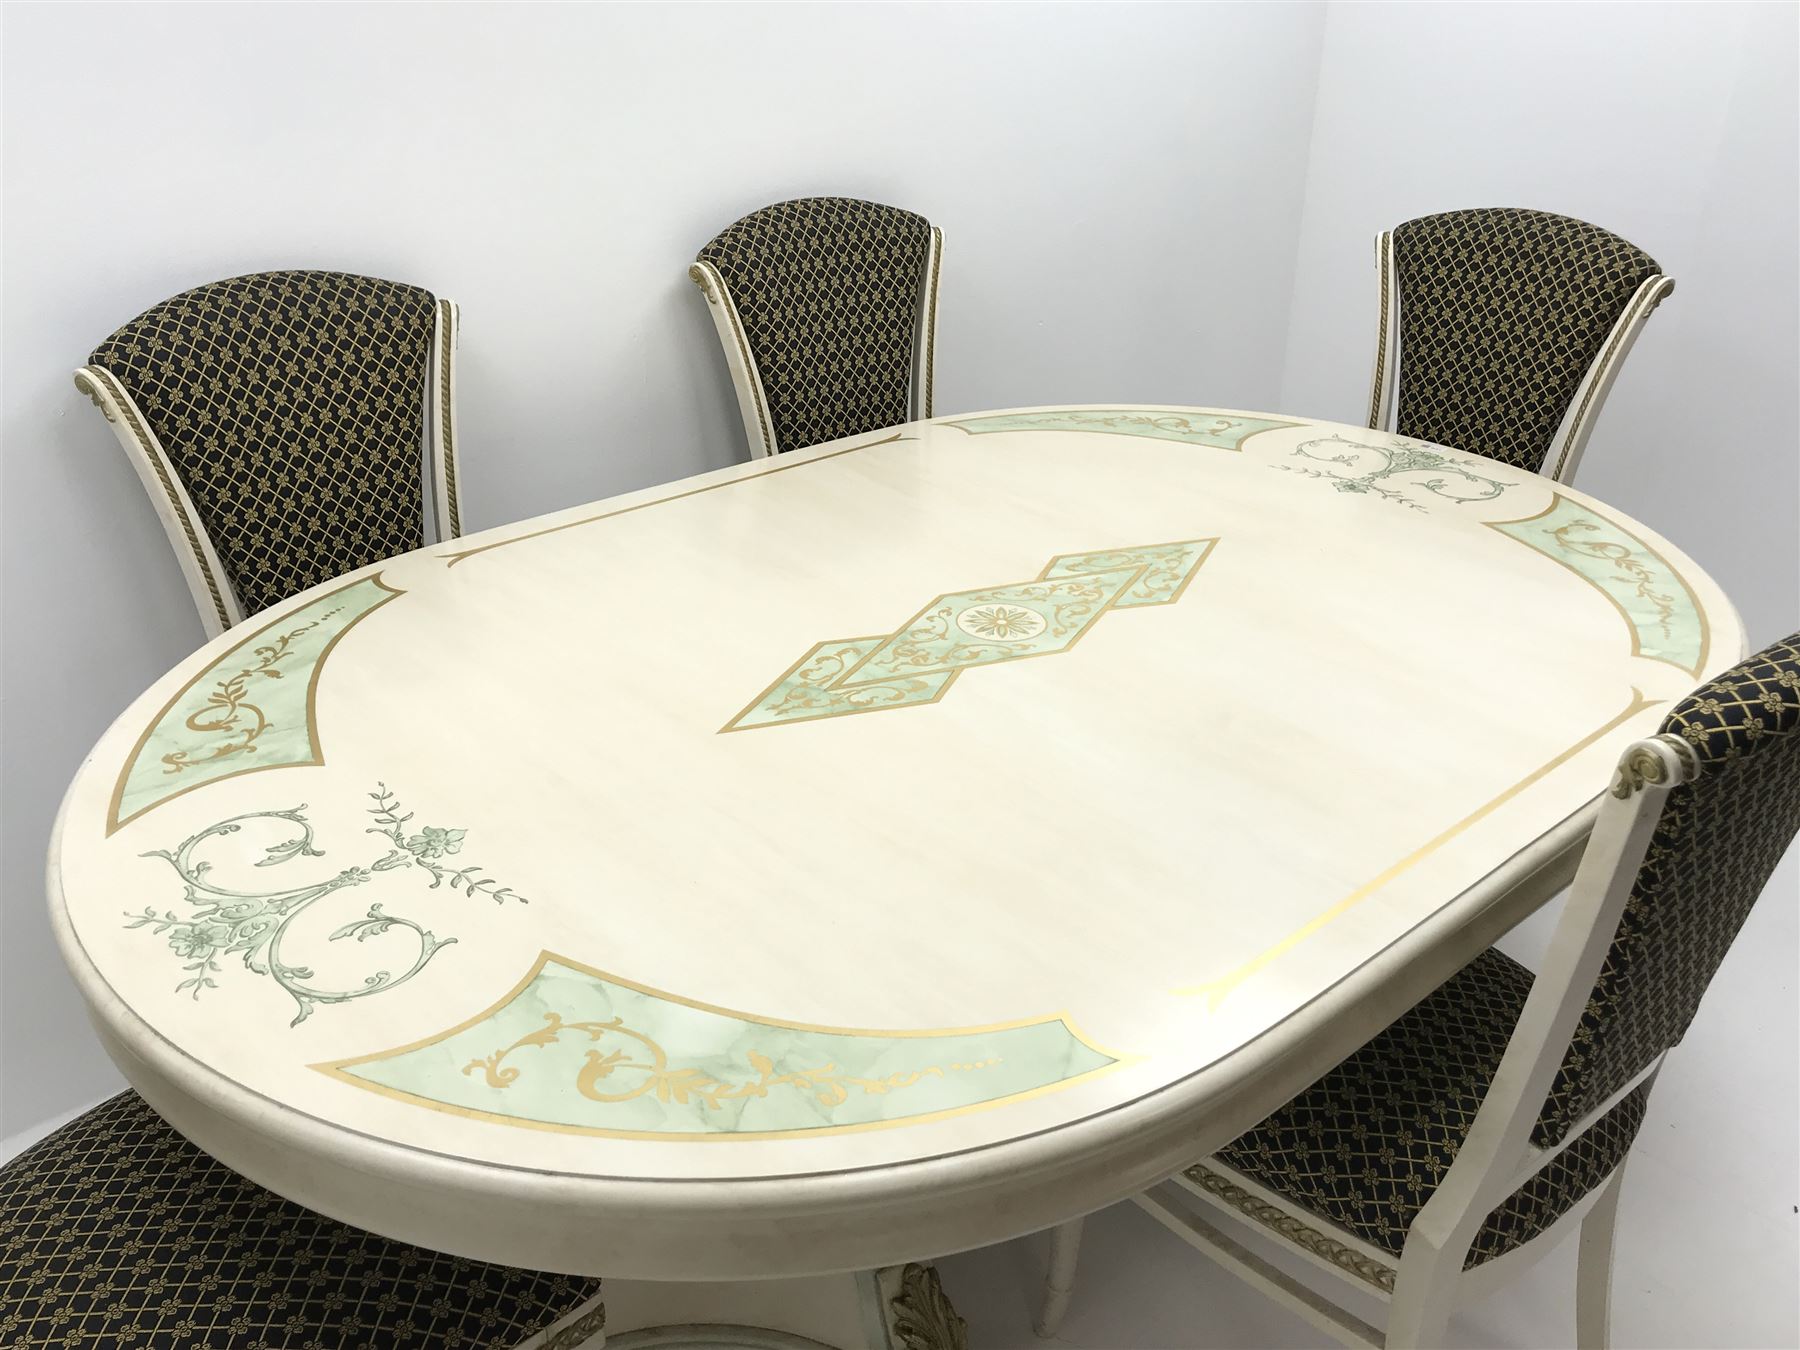 Italian style dining table - Image 2 of 4